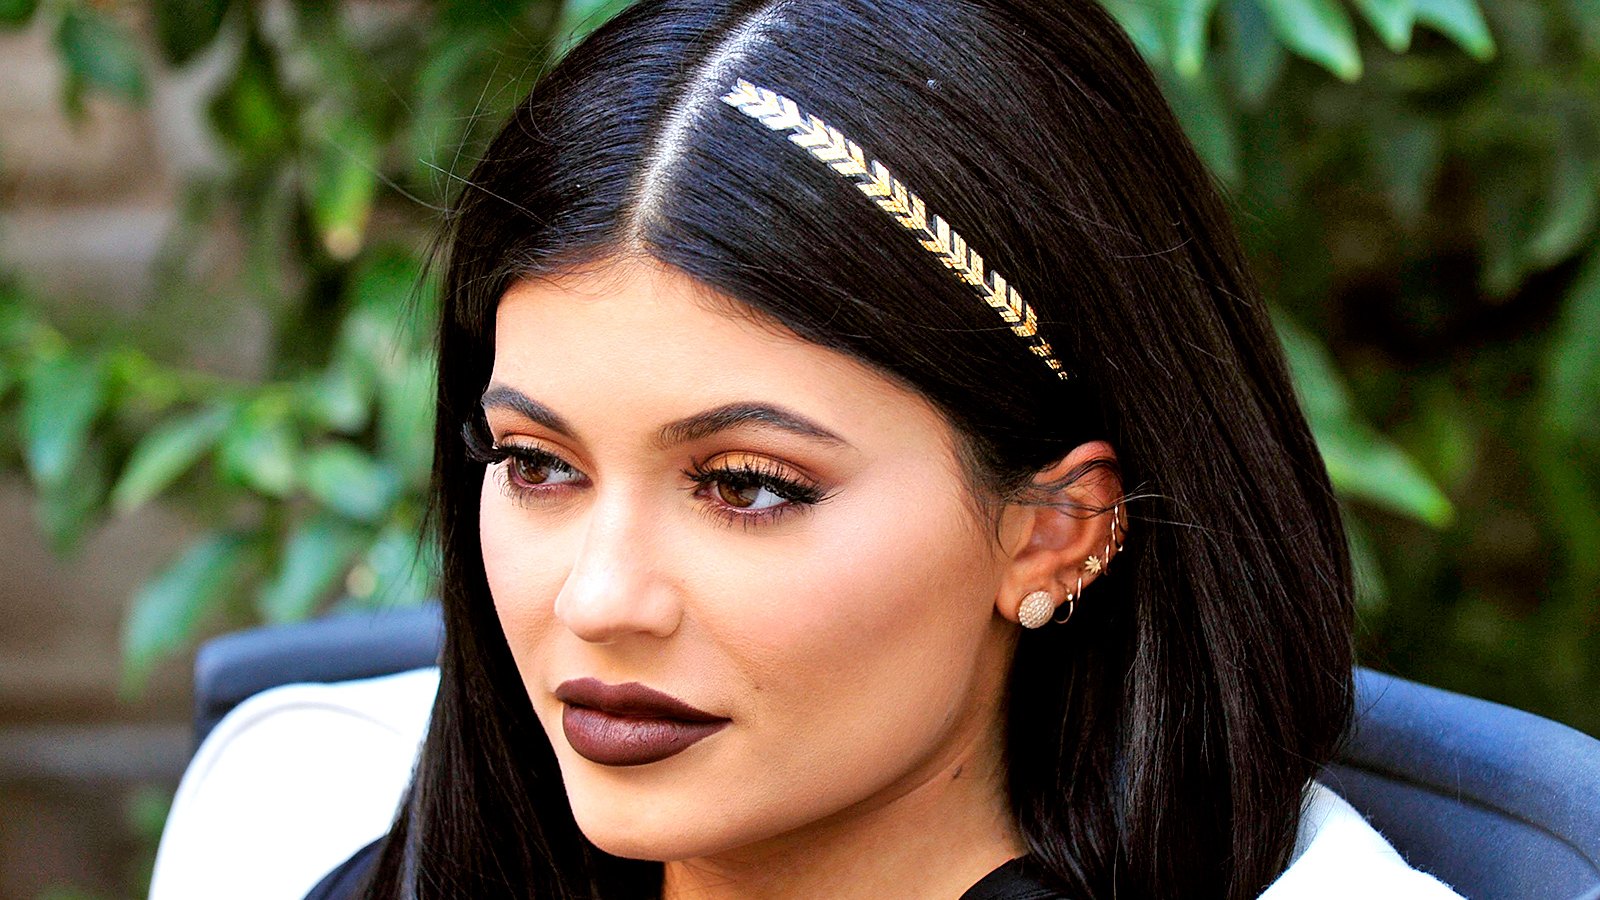 Kylie Jenner shows off one of the new scunci hair tattoos